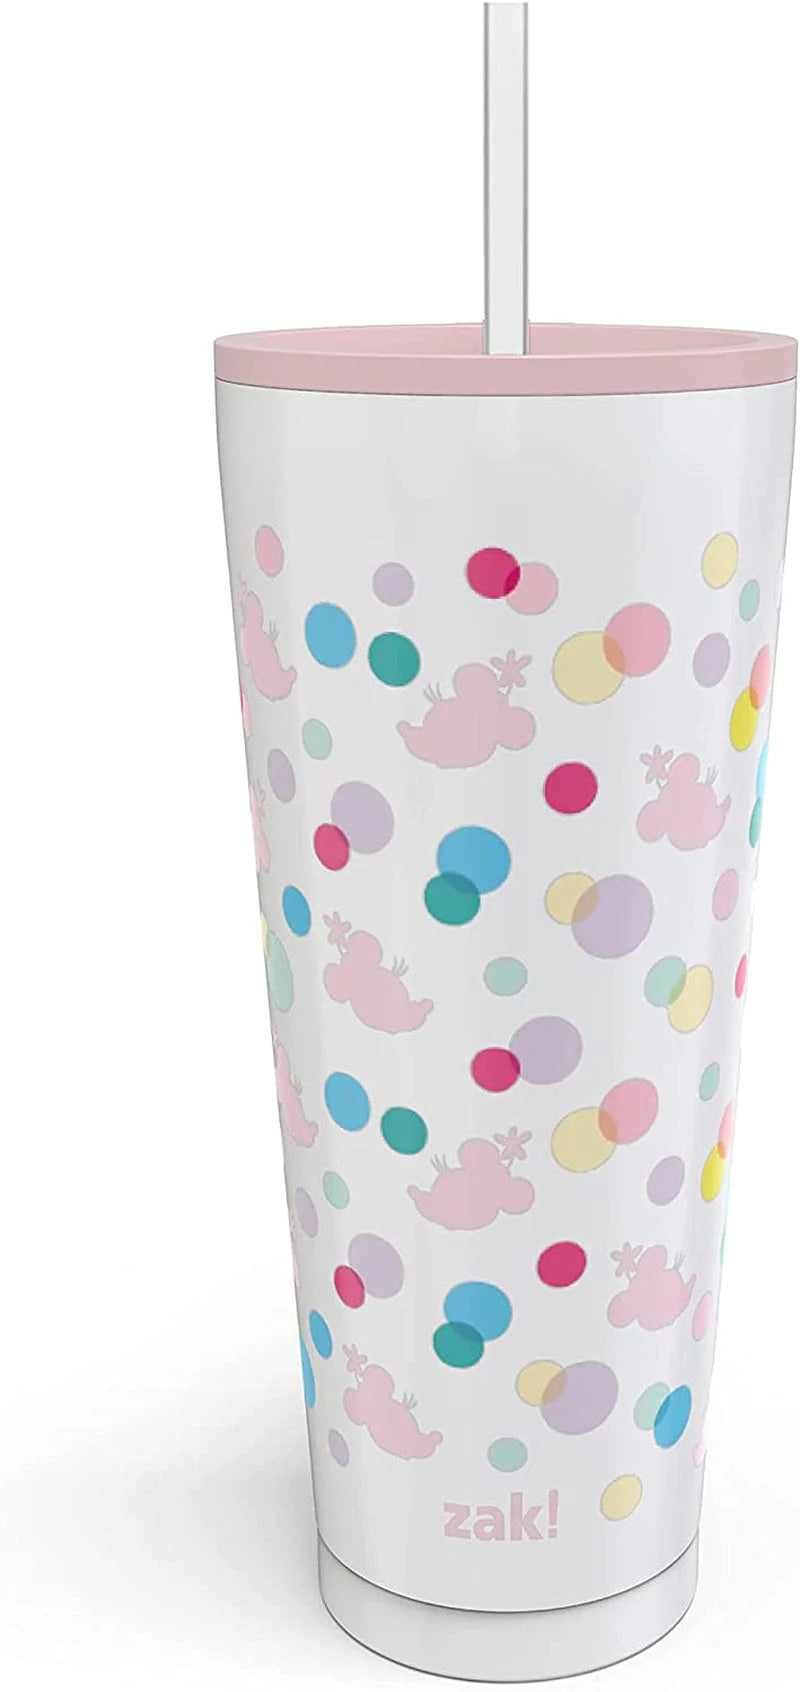 Zak Designs Sanrio Hello Kitty Vacuum Insulated Stainless Steel Travel Tumbler with Splash-Proof Lid, Includes Reusable Plastic Straw and Fits in Car Cup Holders (18/8 SS, 25 Oz)